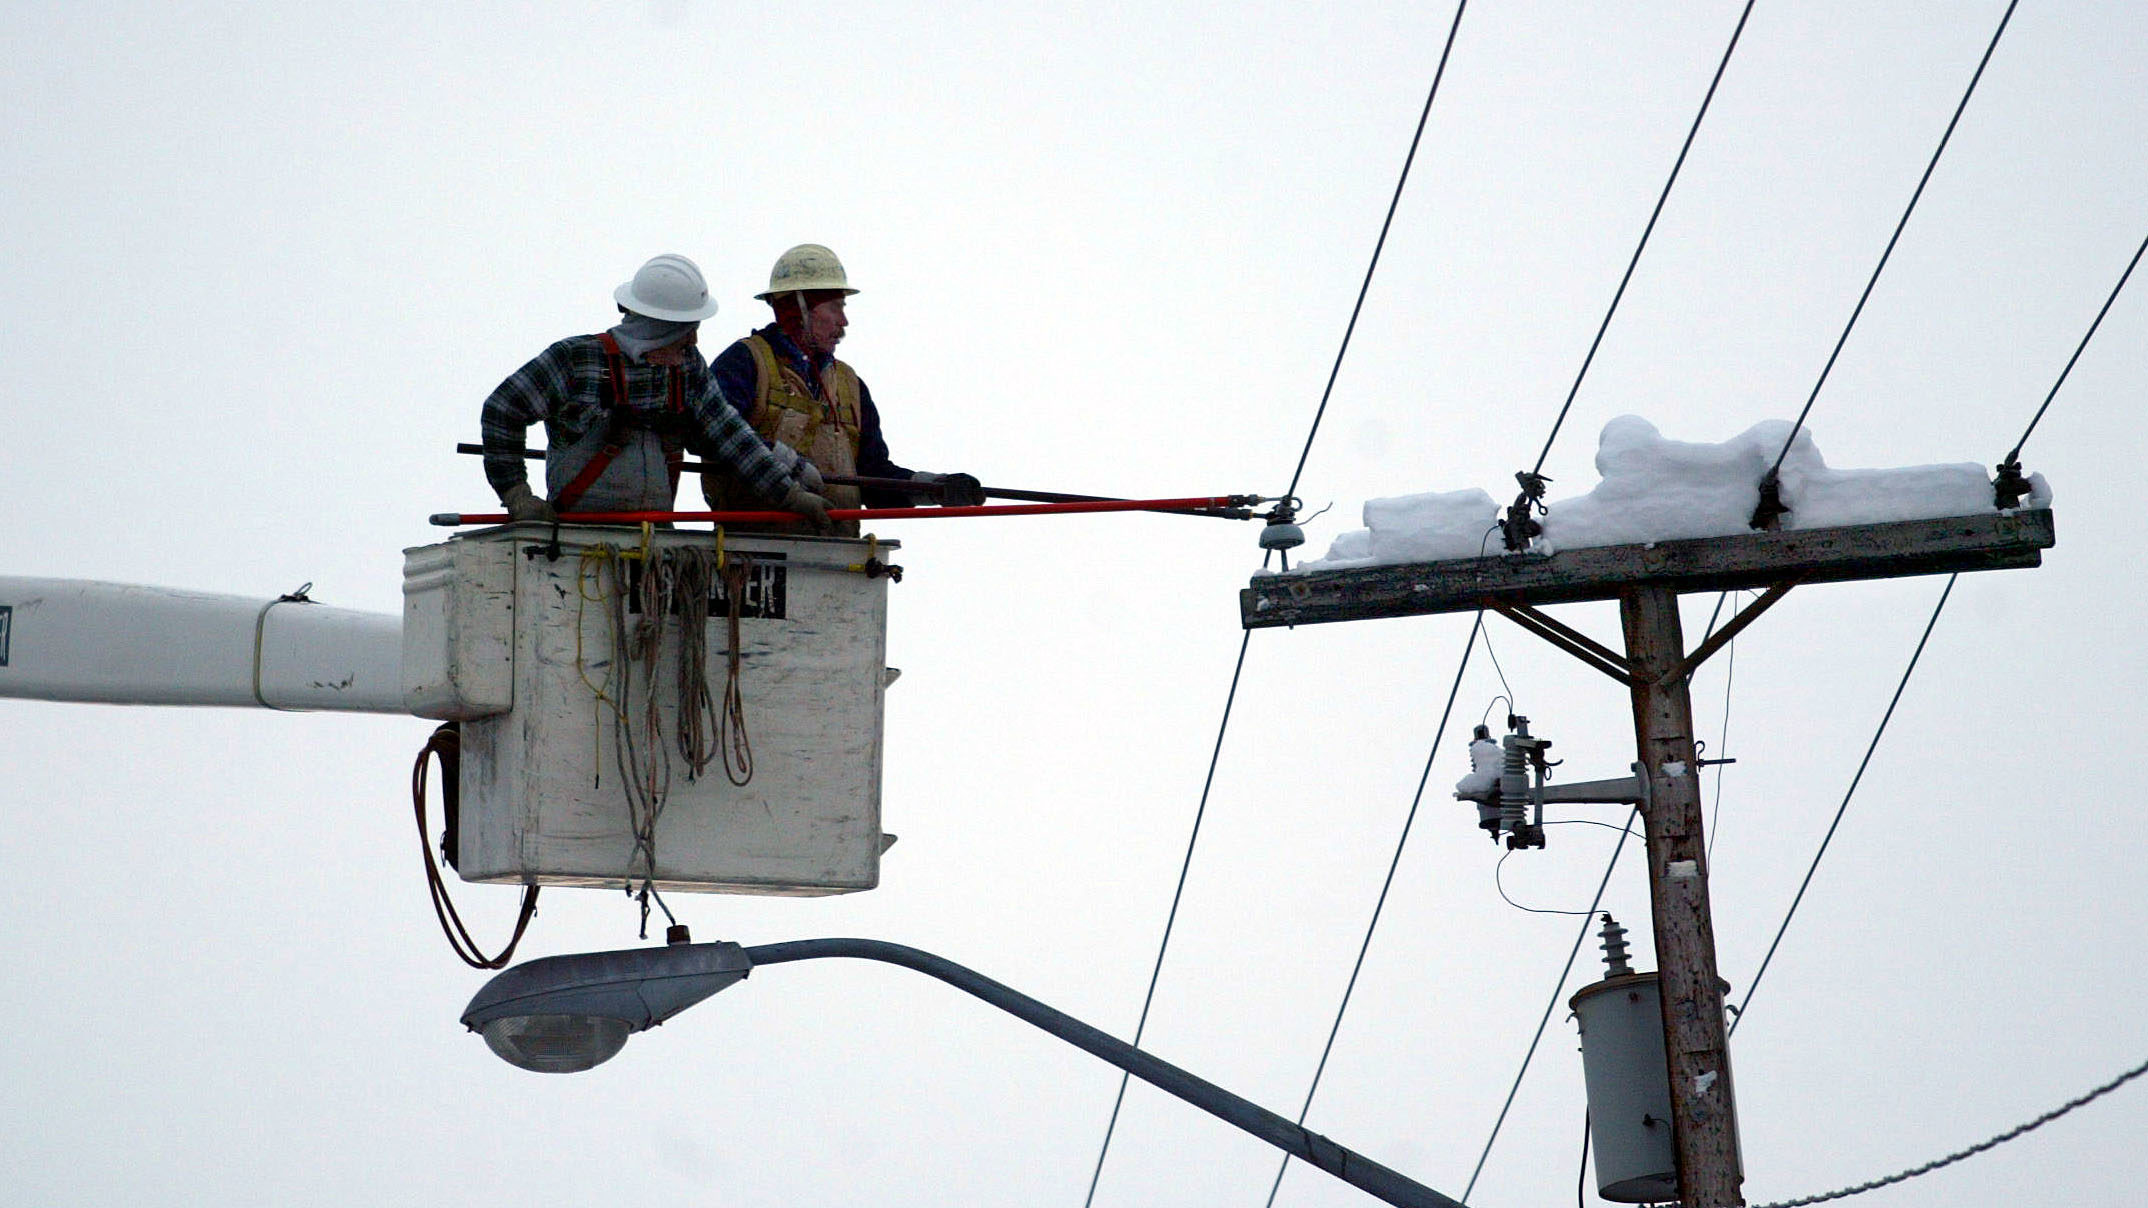 Two men work on a power outage, a power outage in sandy was caused by vandals...